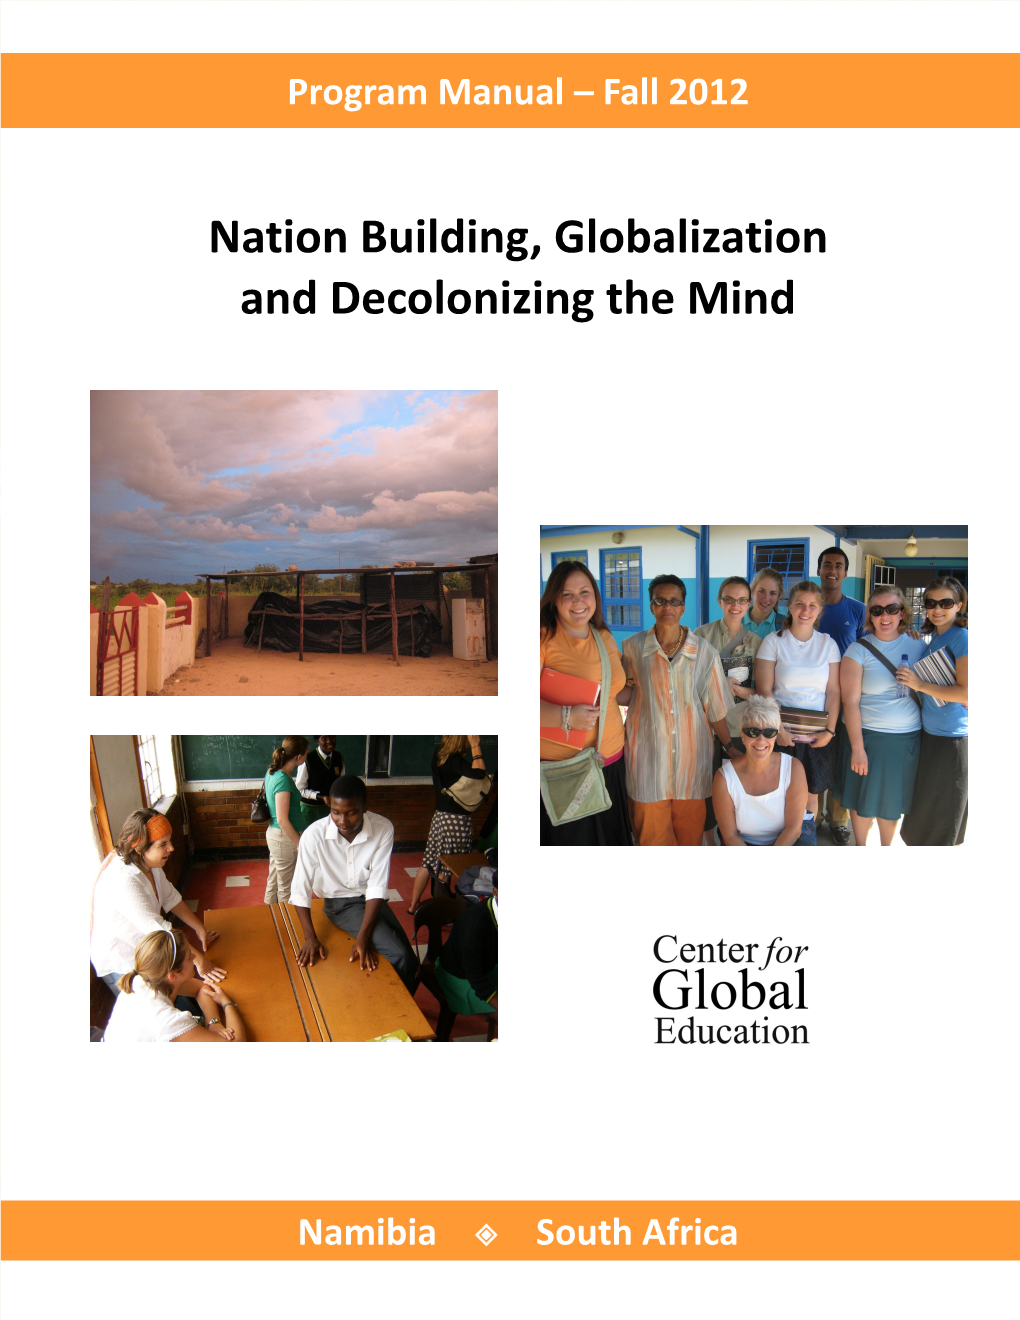 Nation Building, Globalization and Decolonizing the Mind Program Manual—Fall 2012